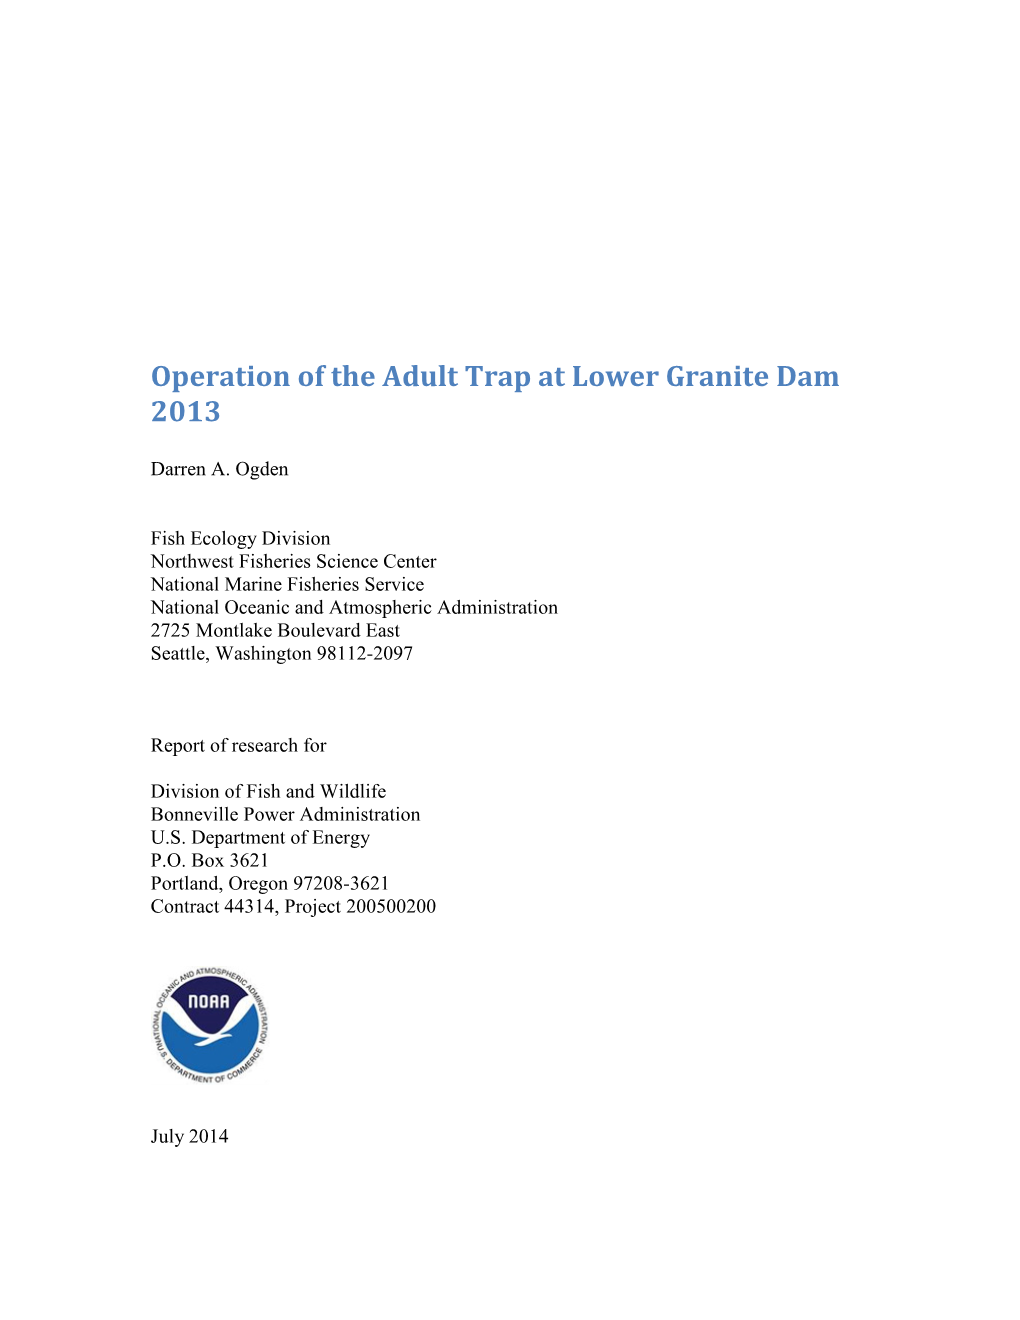 Operation of the Adult Trap at Lower Granite Dam 2013